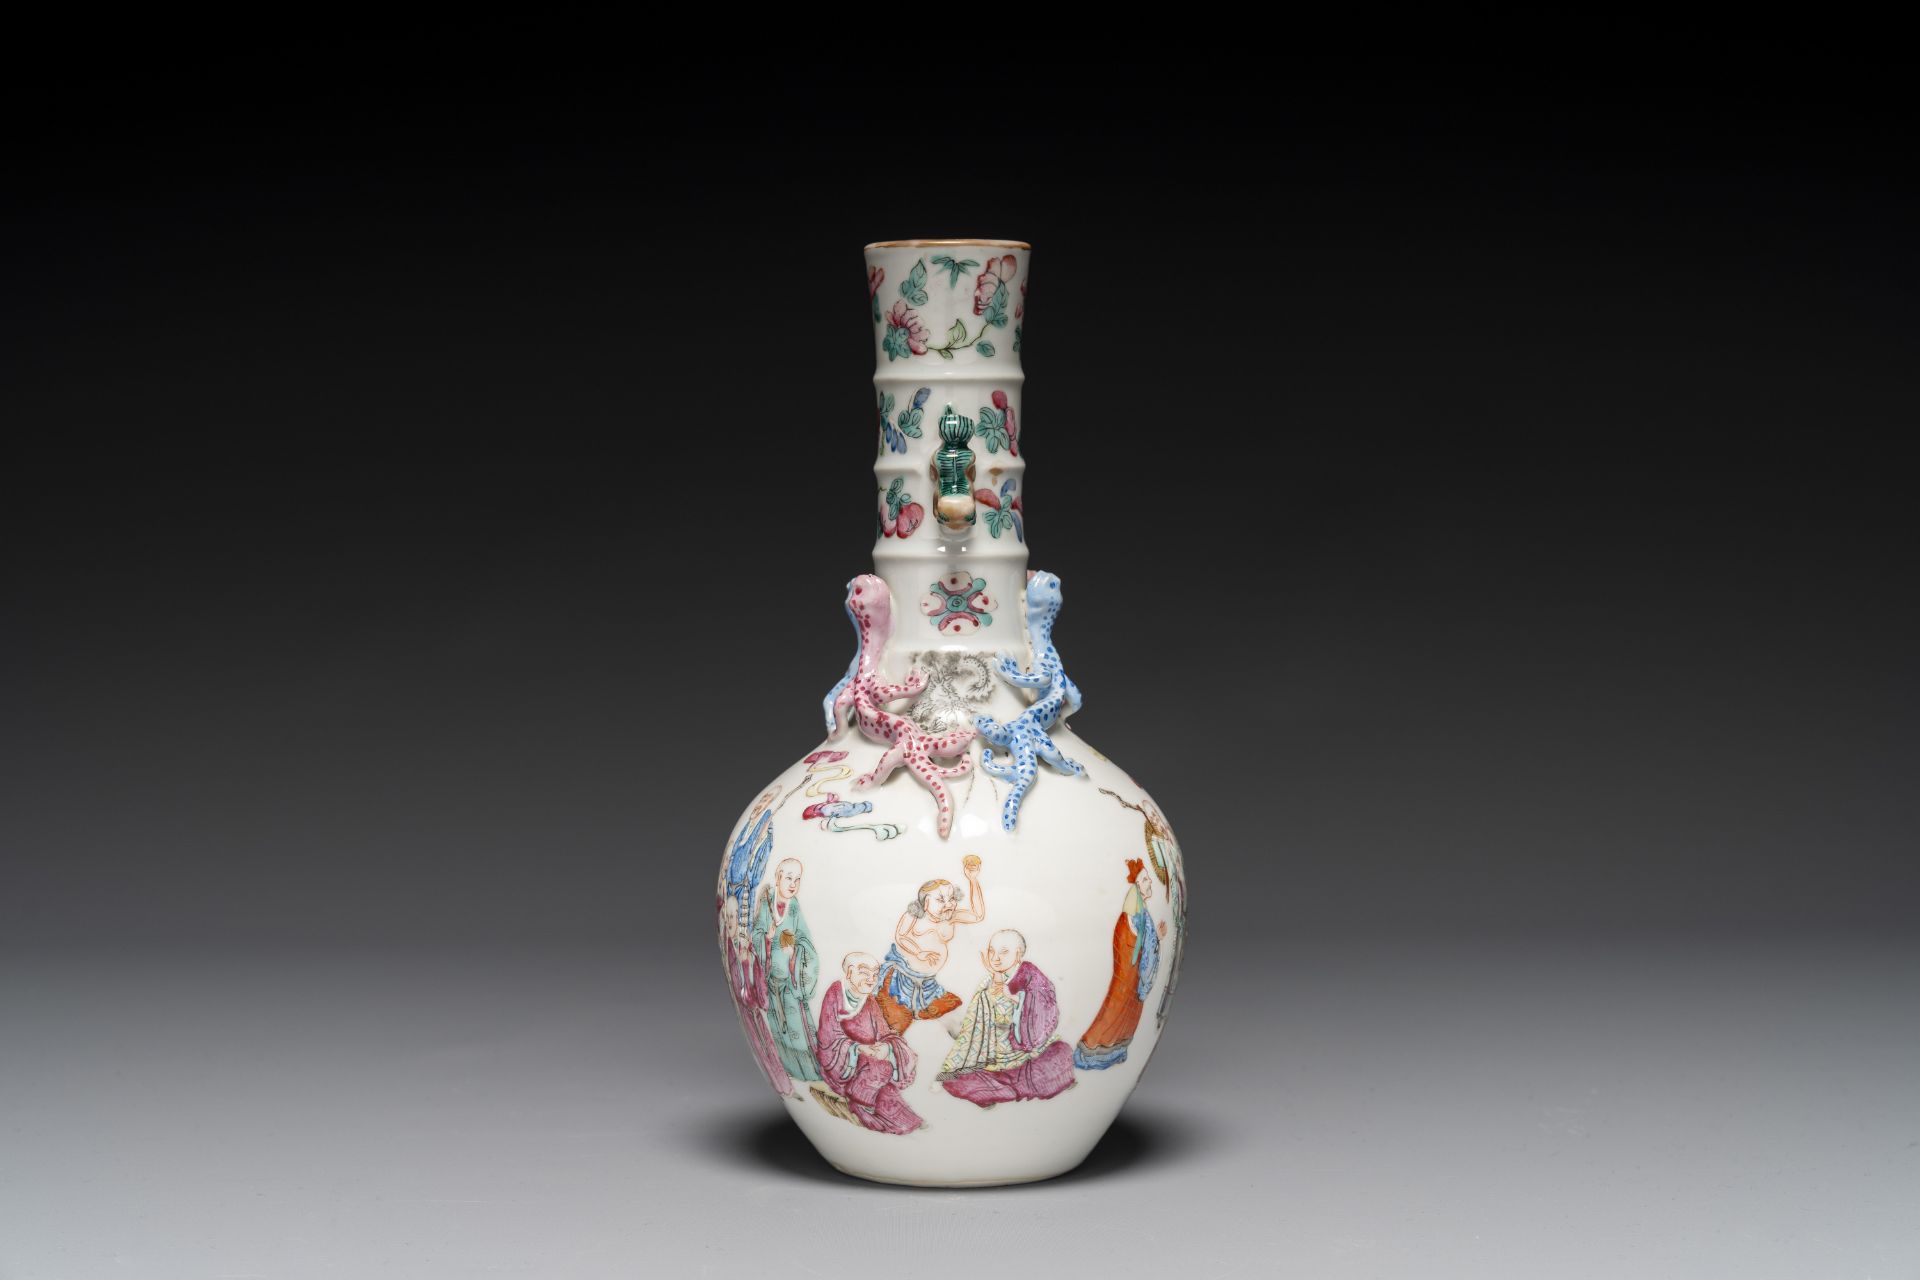 A Chinese famille rose '18 Luohan' bottle vase, 19th C. - Image 4 of 6